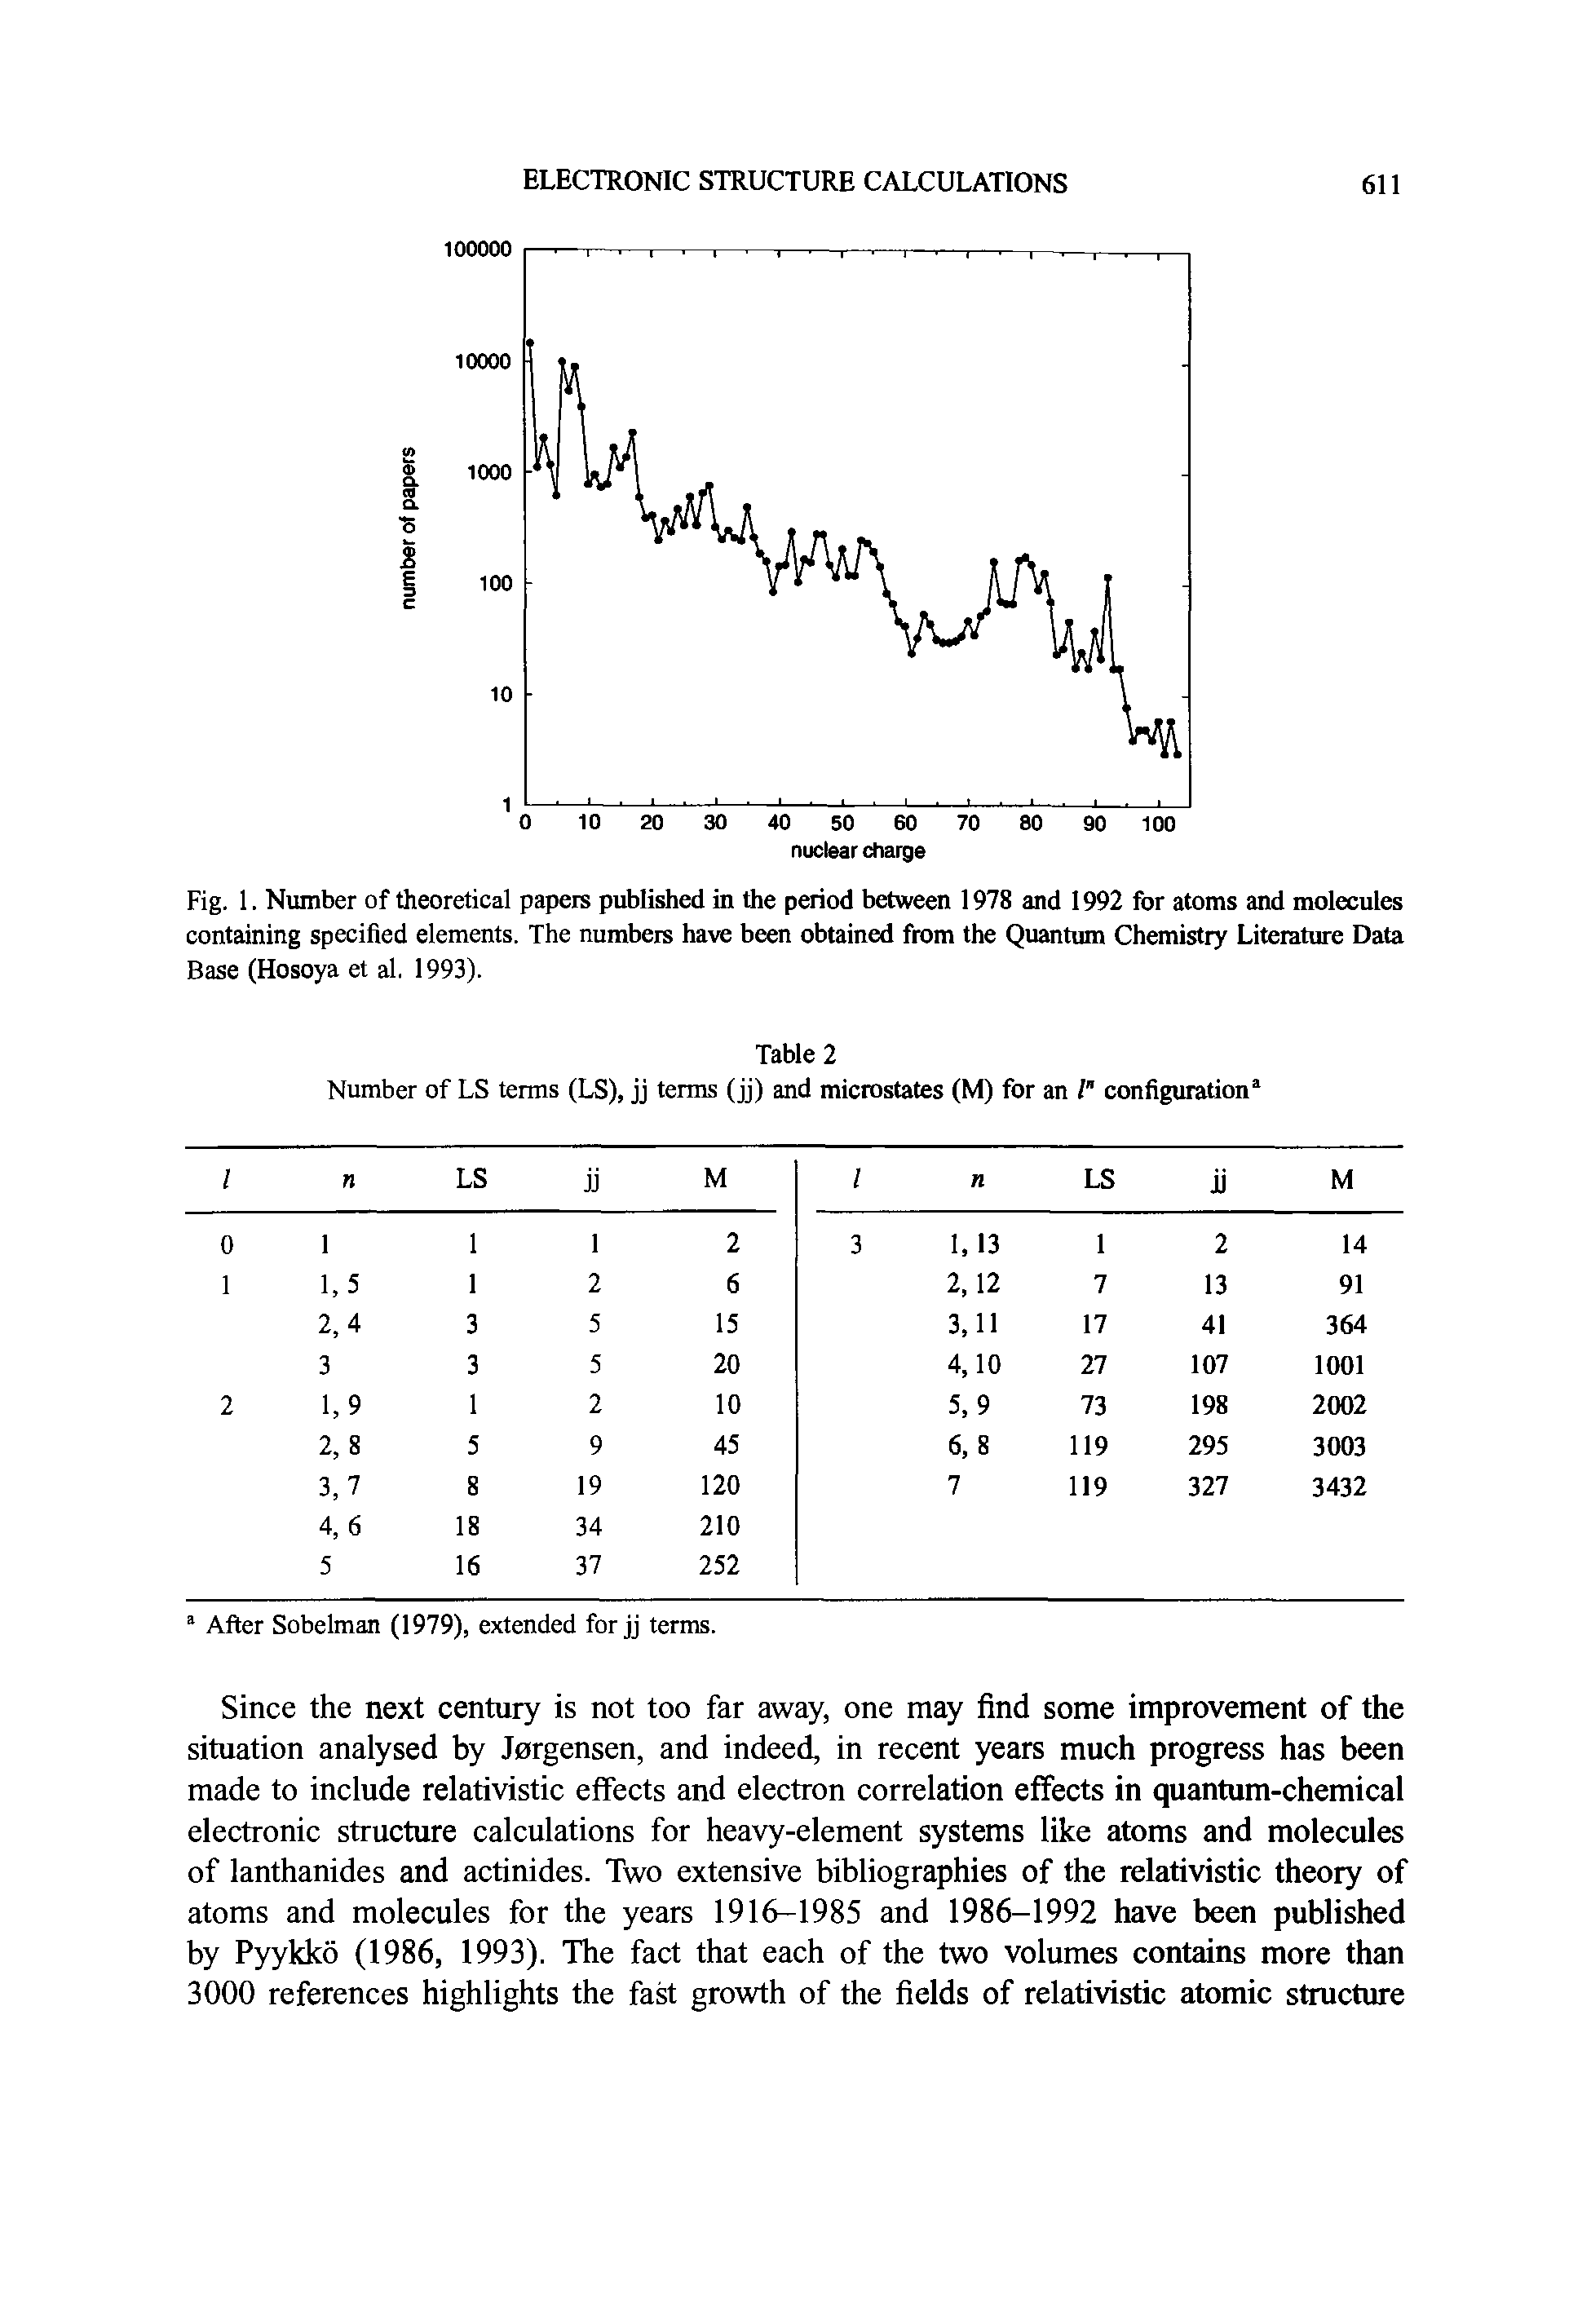 Fig. 1. Number of theoretical papers published in the period between 1978 and 1992 for atoms and molecules containing specified elements. The numbers have been obtained from the Quantum Chemistry Literature Data Base (Hosoya et al. 1993).